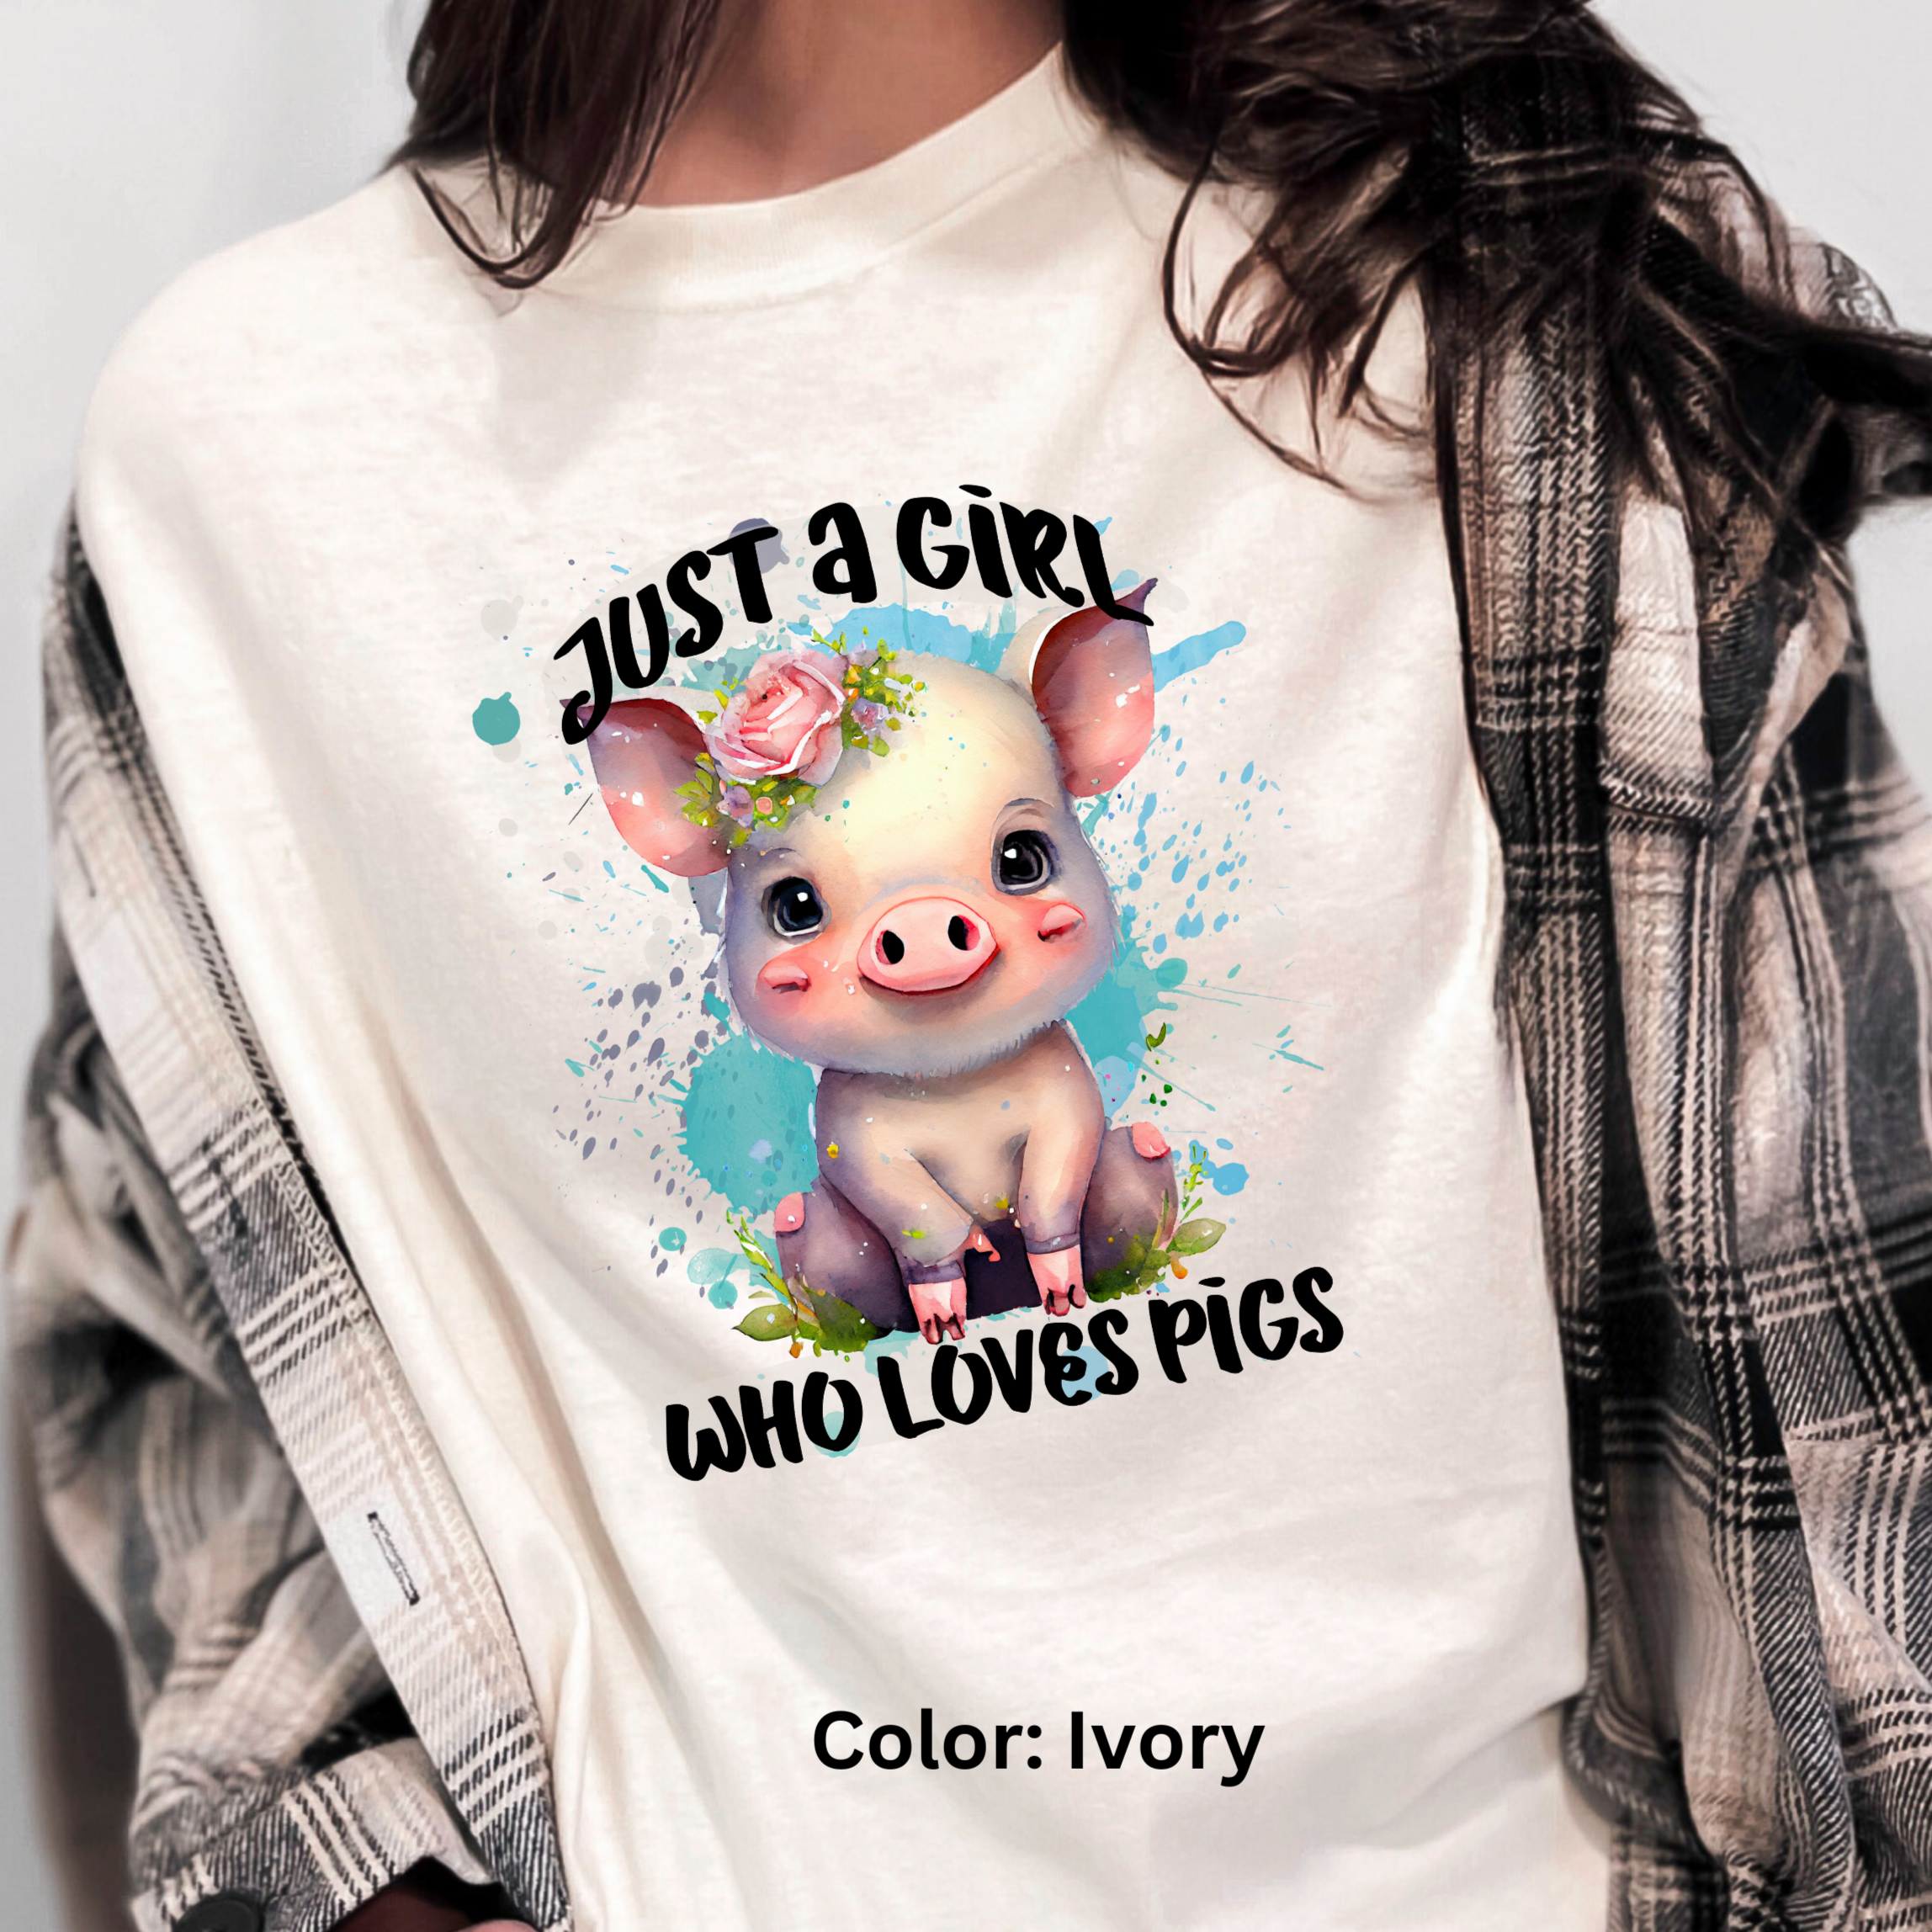 I'm Just A Girl That Loves Pigs Comfort Colors T-shirt - Cute Pig Lover Tee